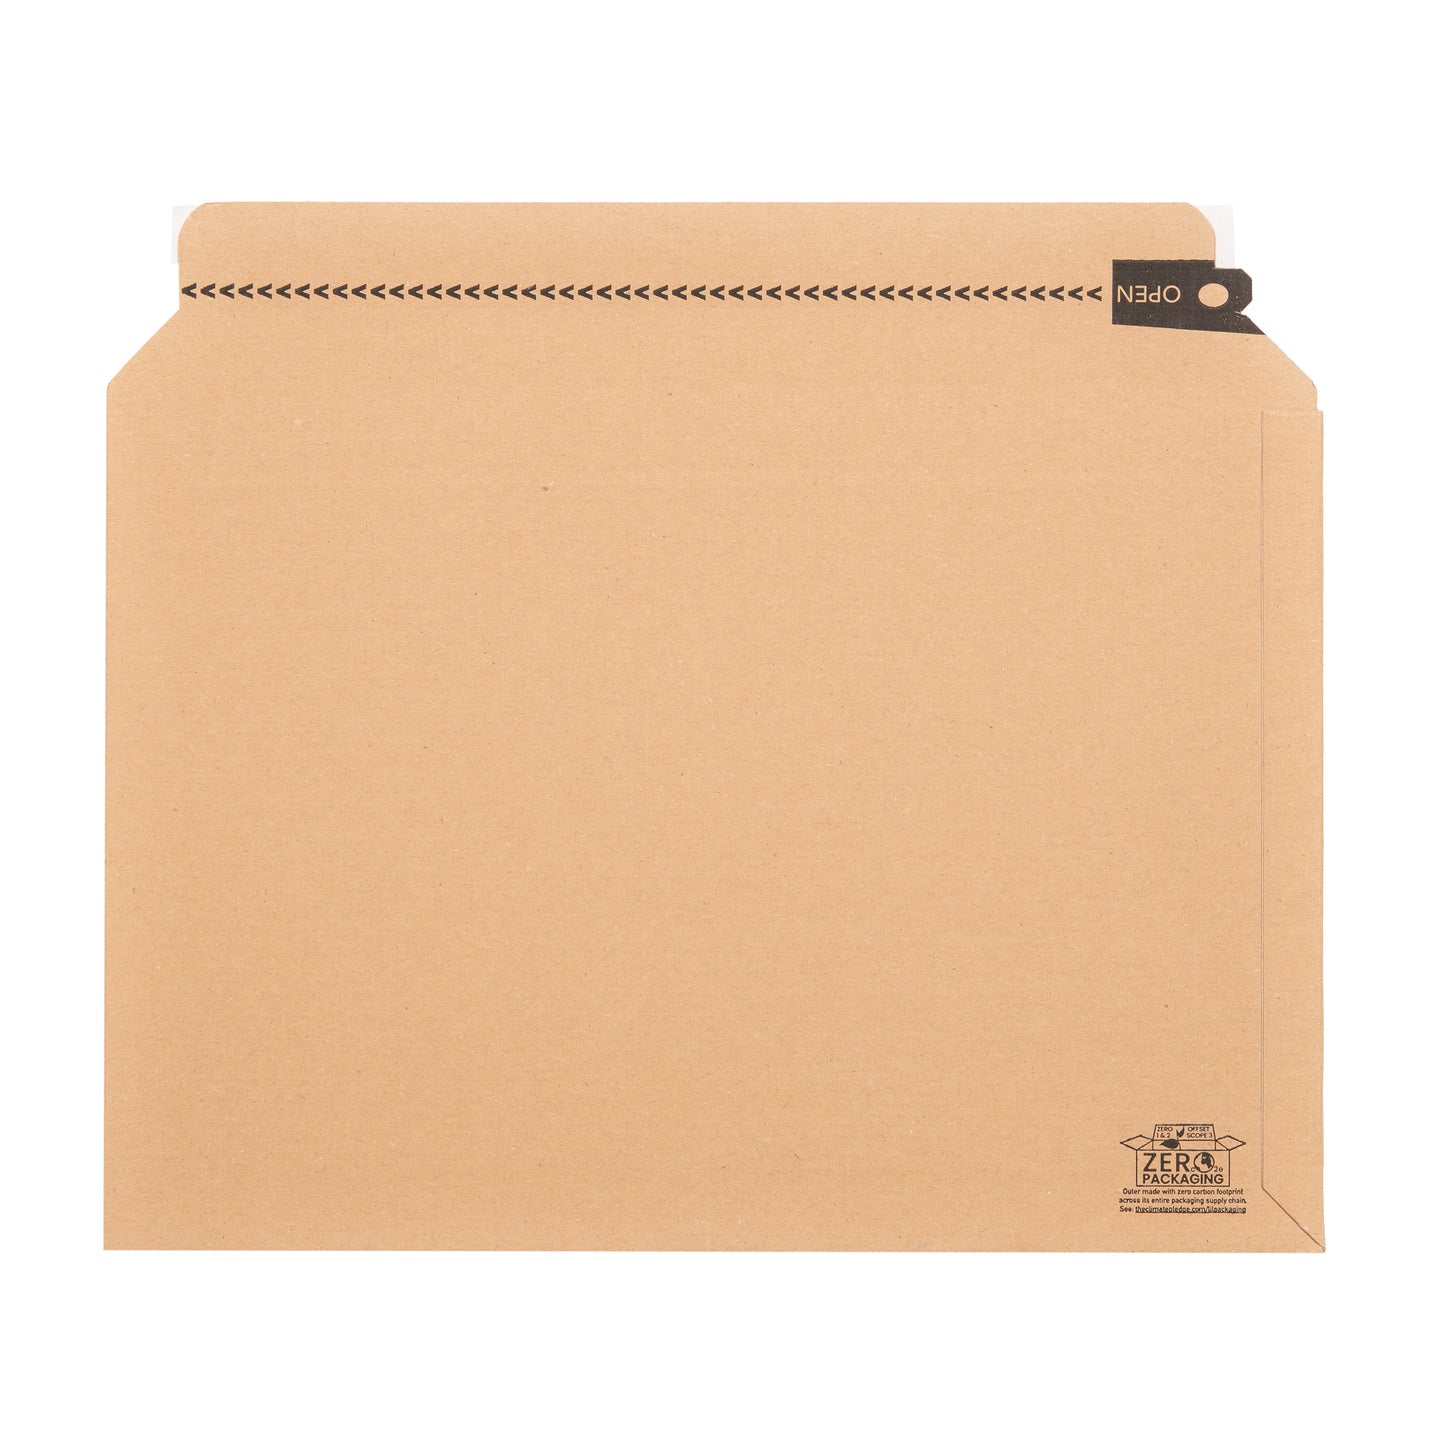 A2 Cardboard Envelope Mailer With Boxform | Lil Packaging